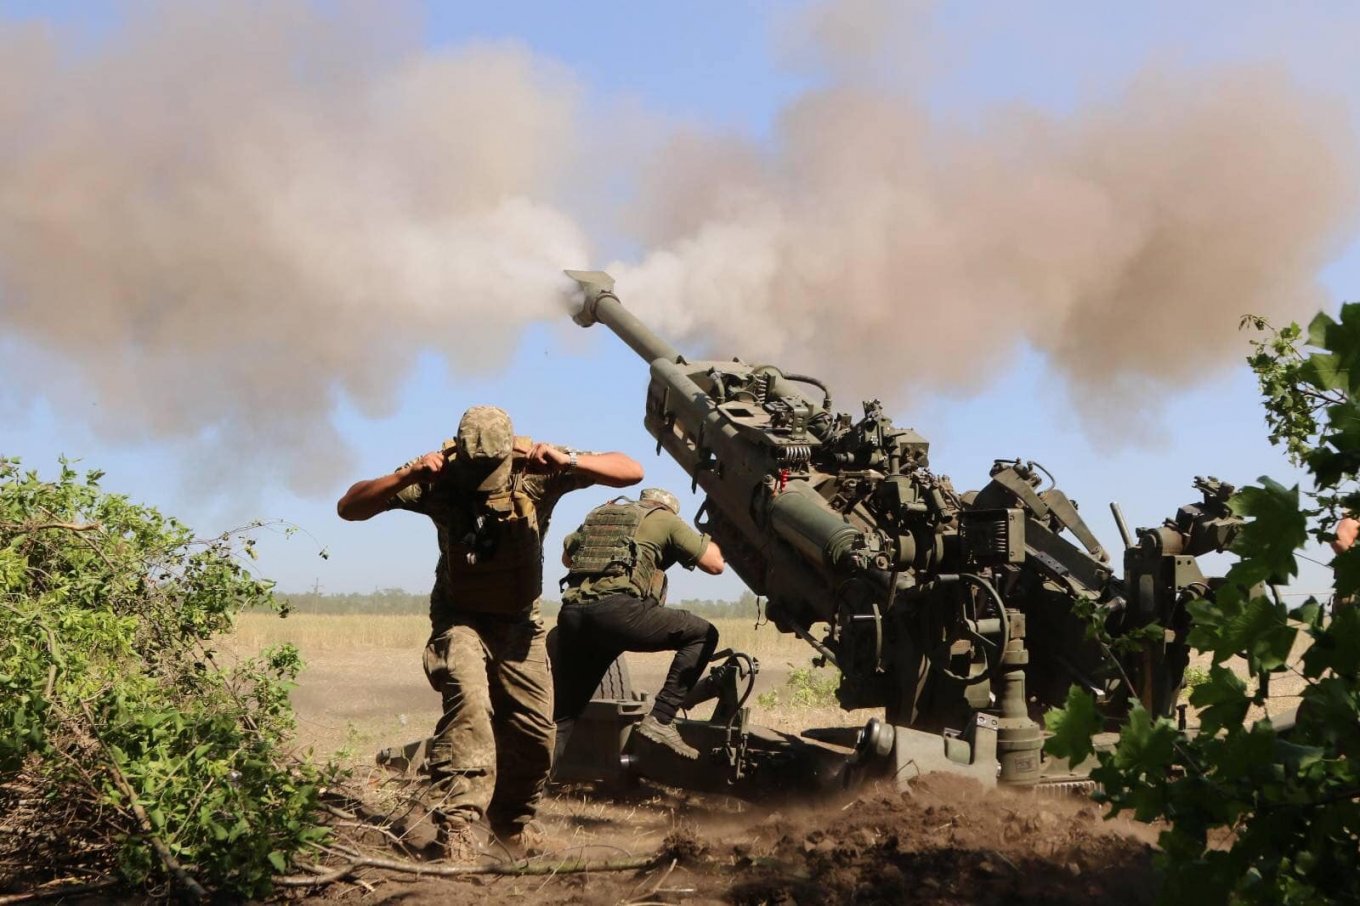 Ukrainian army actively uses 155mm artillery systems, such as the towed M777